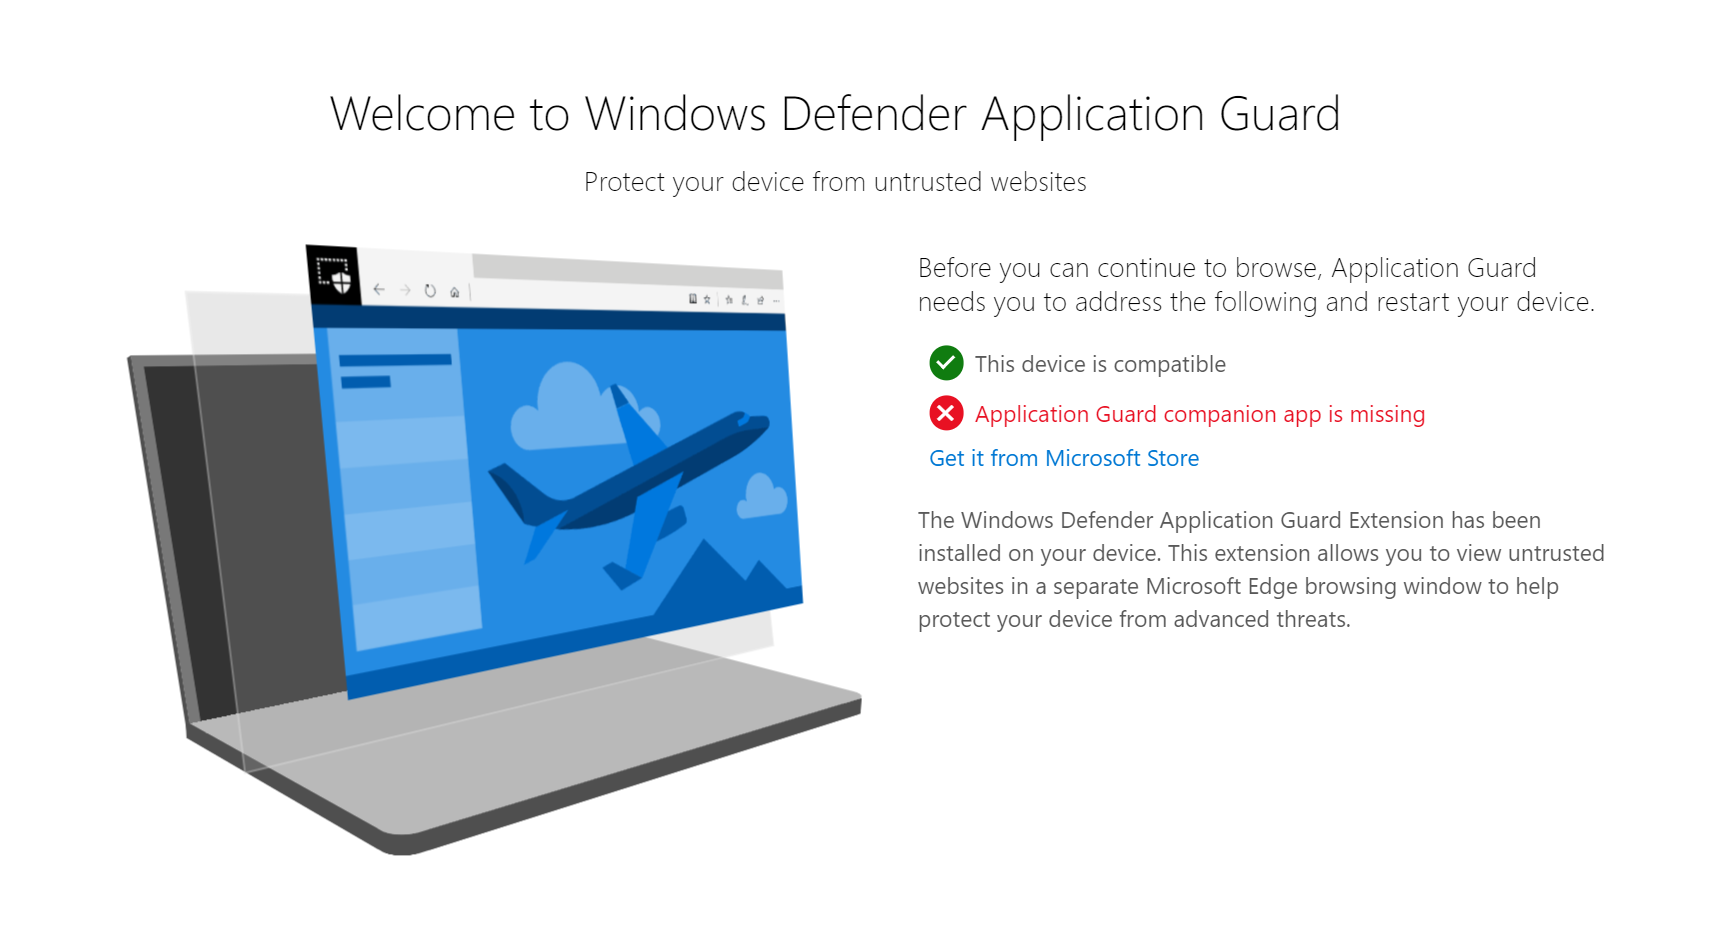 Intel Software Guard Extension windows-defender-application-guard-components-not-complete.png